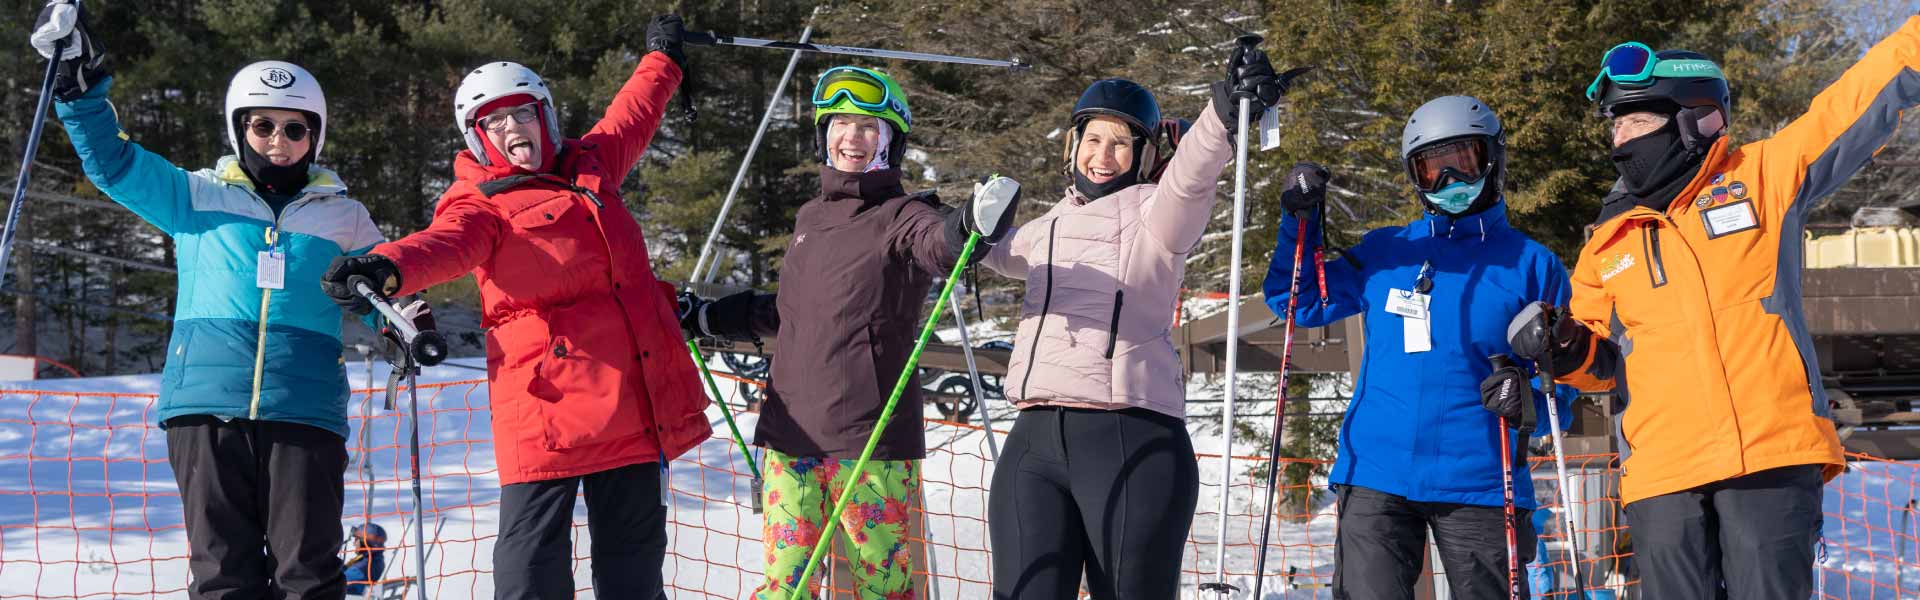 Skiers participating in Women's Club Program